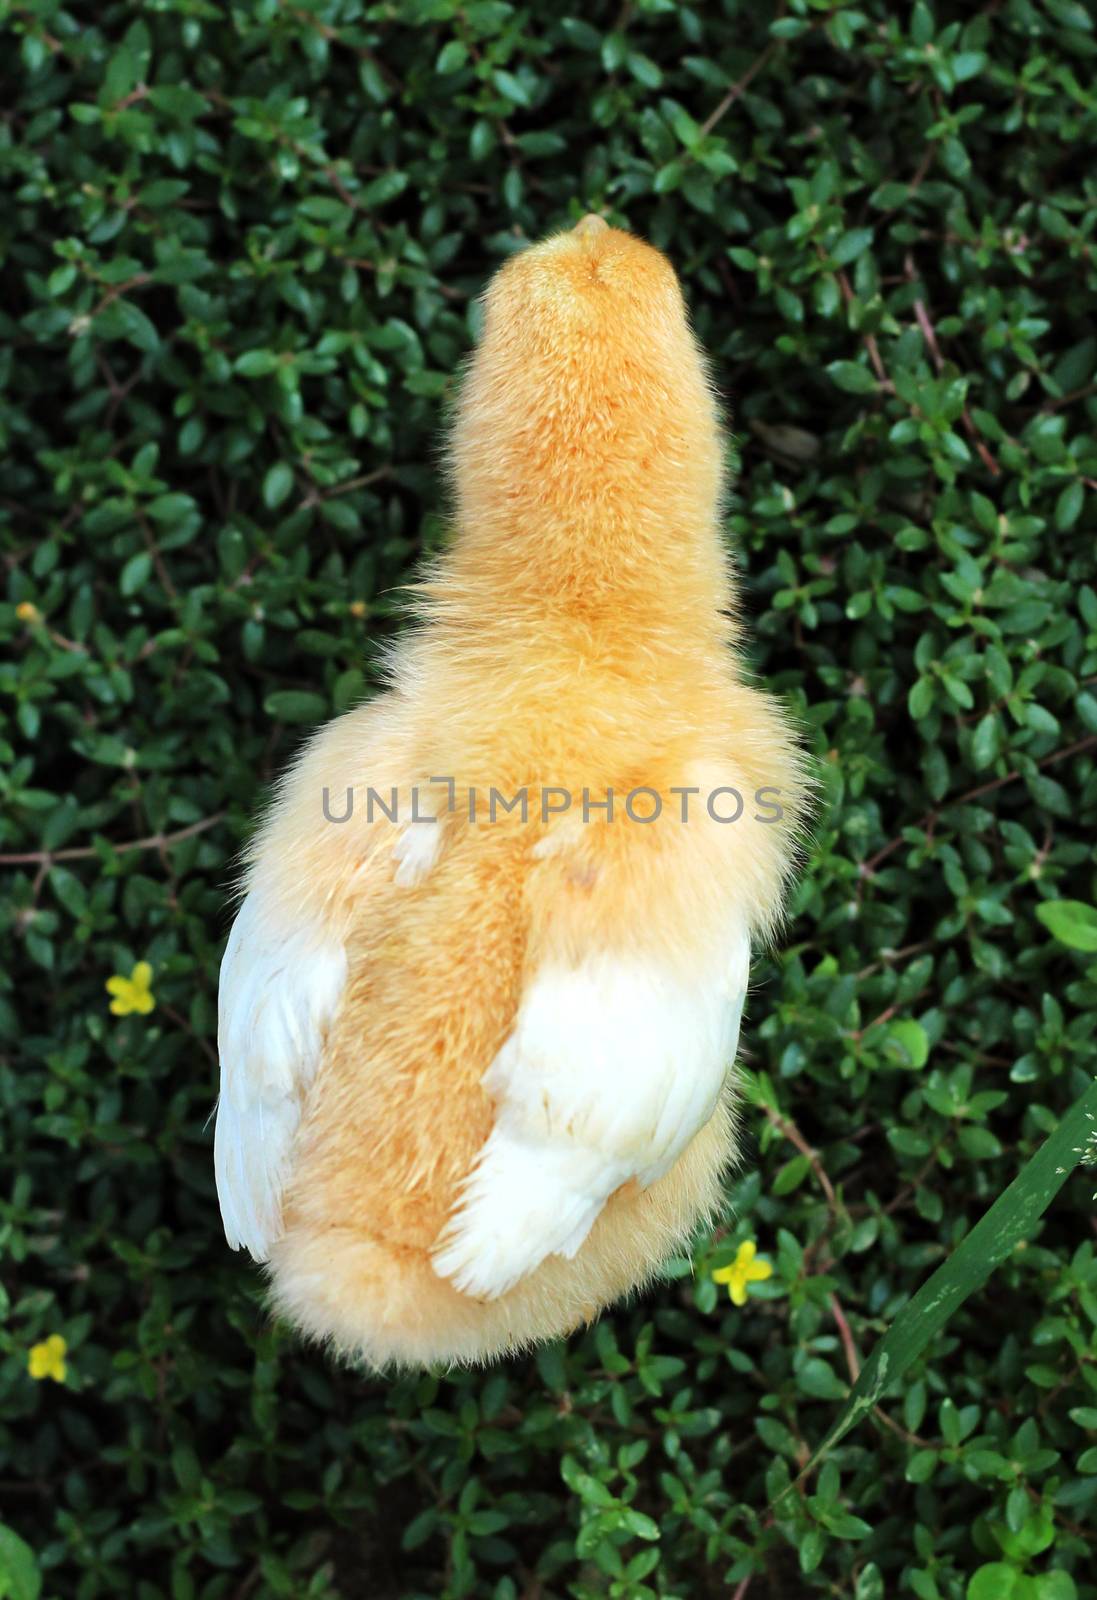 The image of a chick looking for food on the ground.